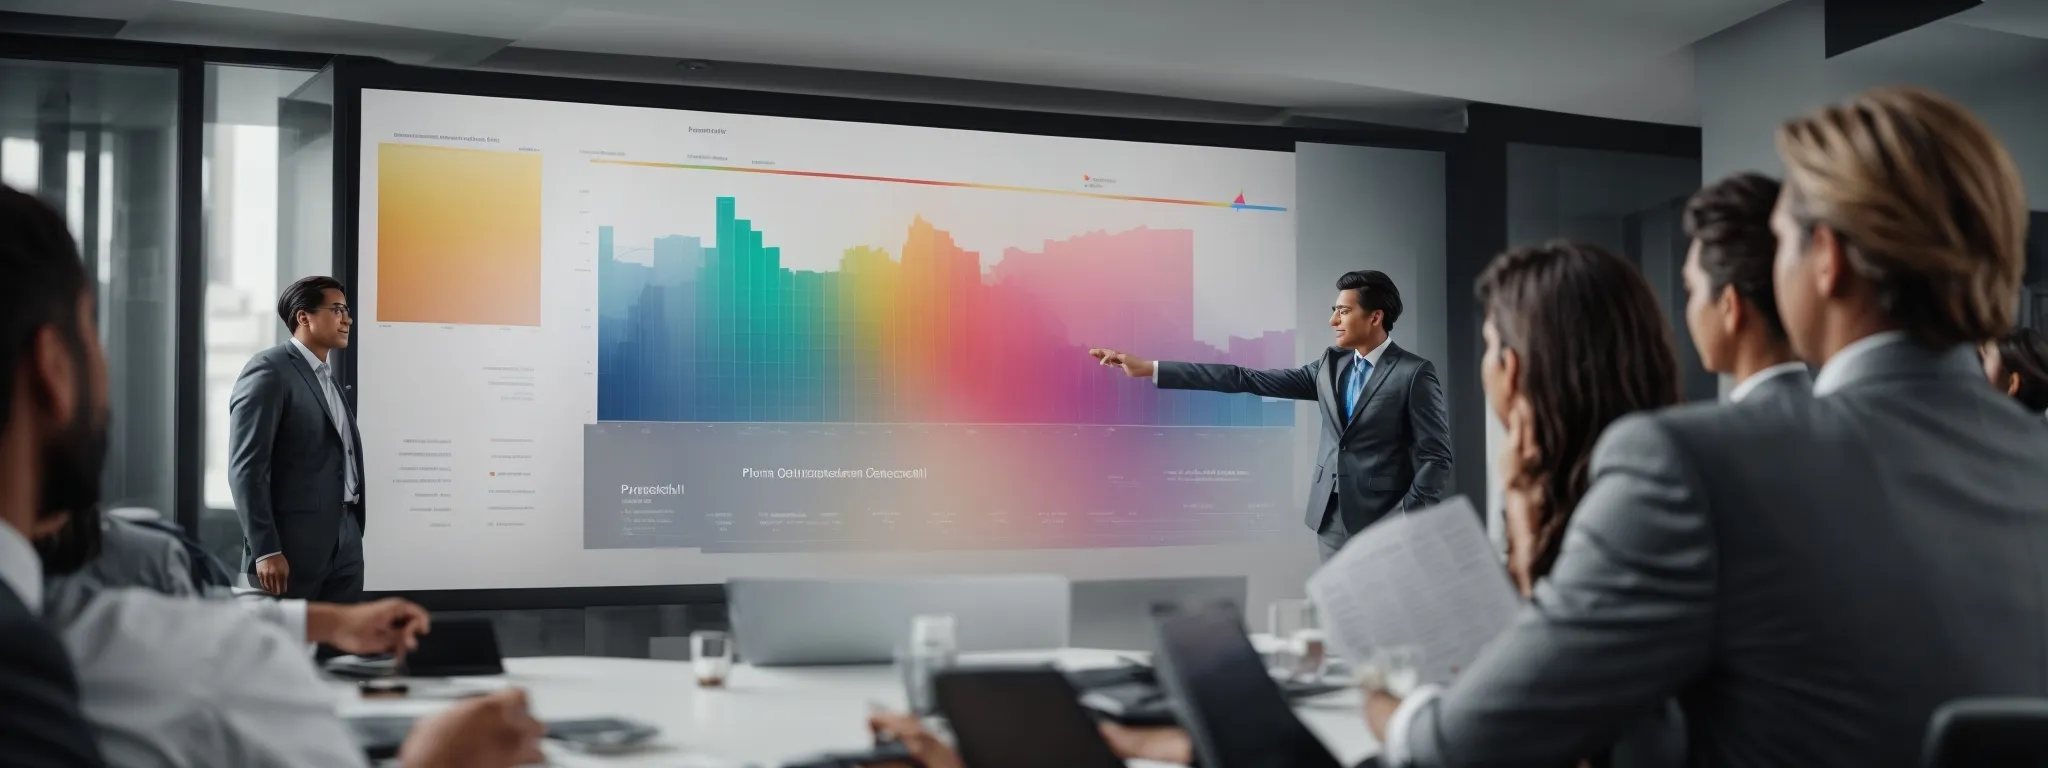 a person presenting a colorful chart on a large screen to a boardroom of attentive professionals.